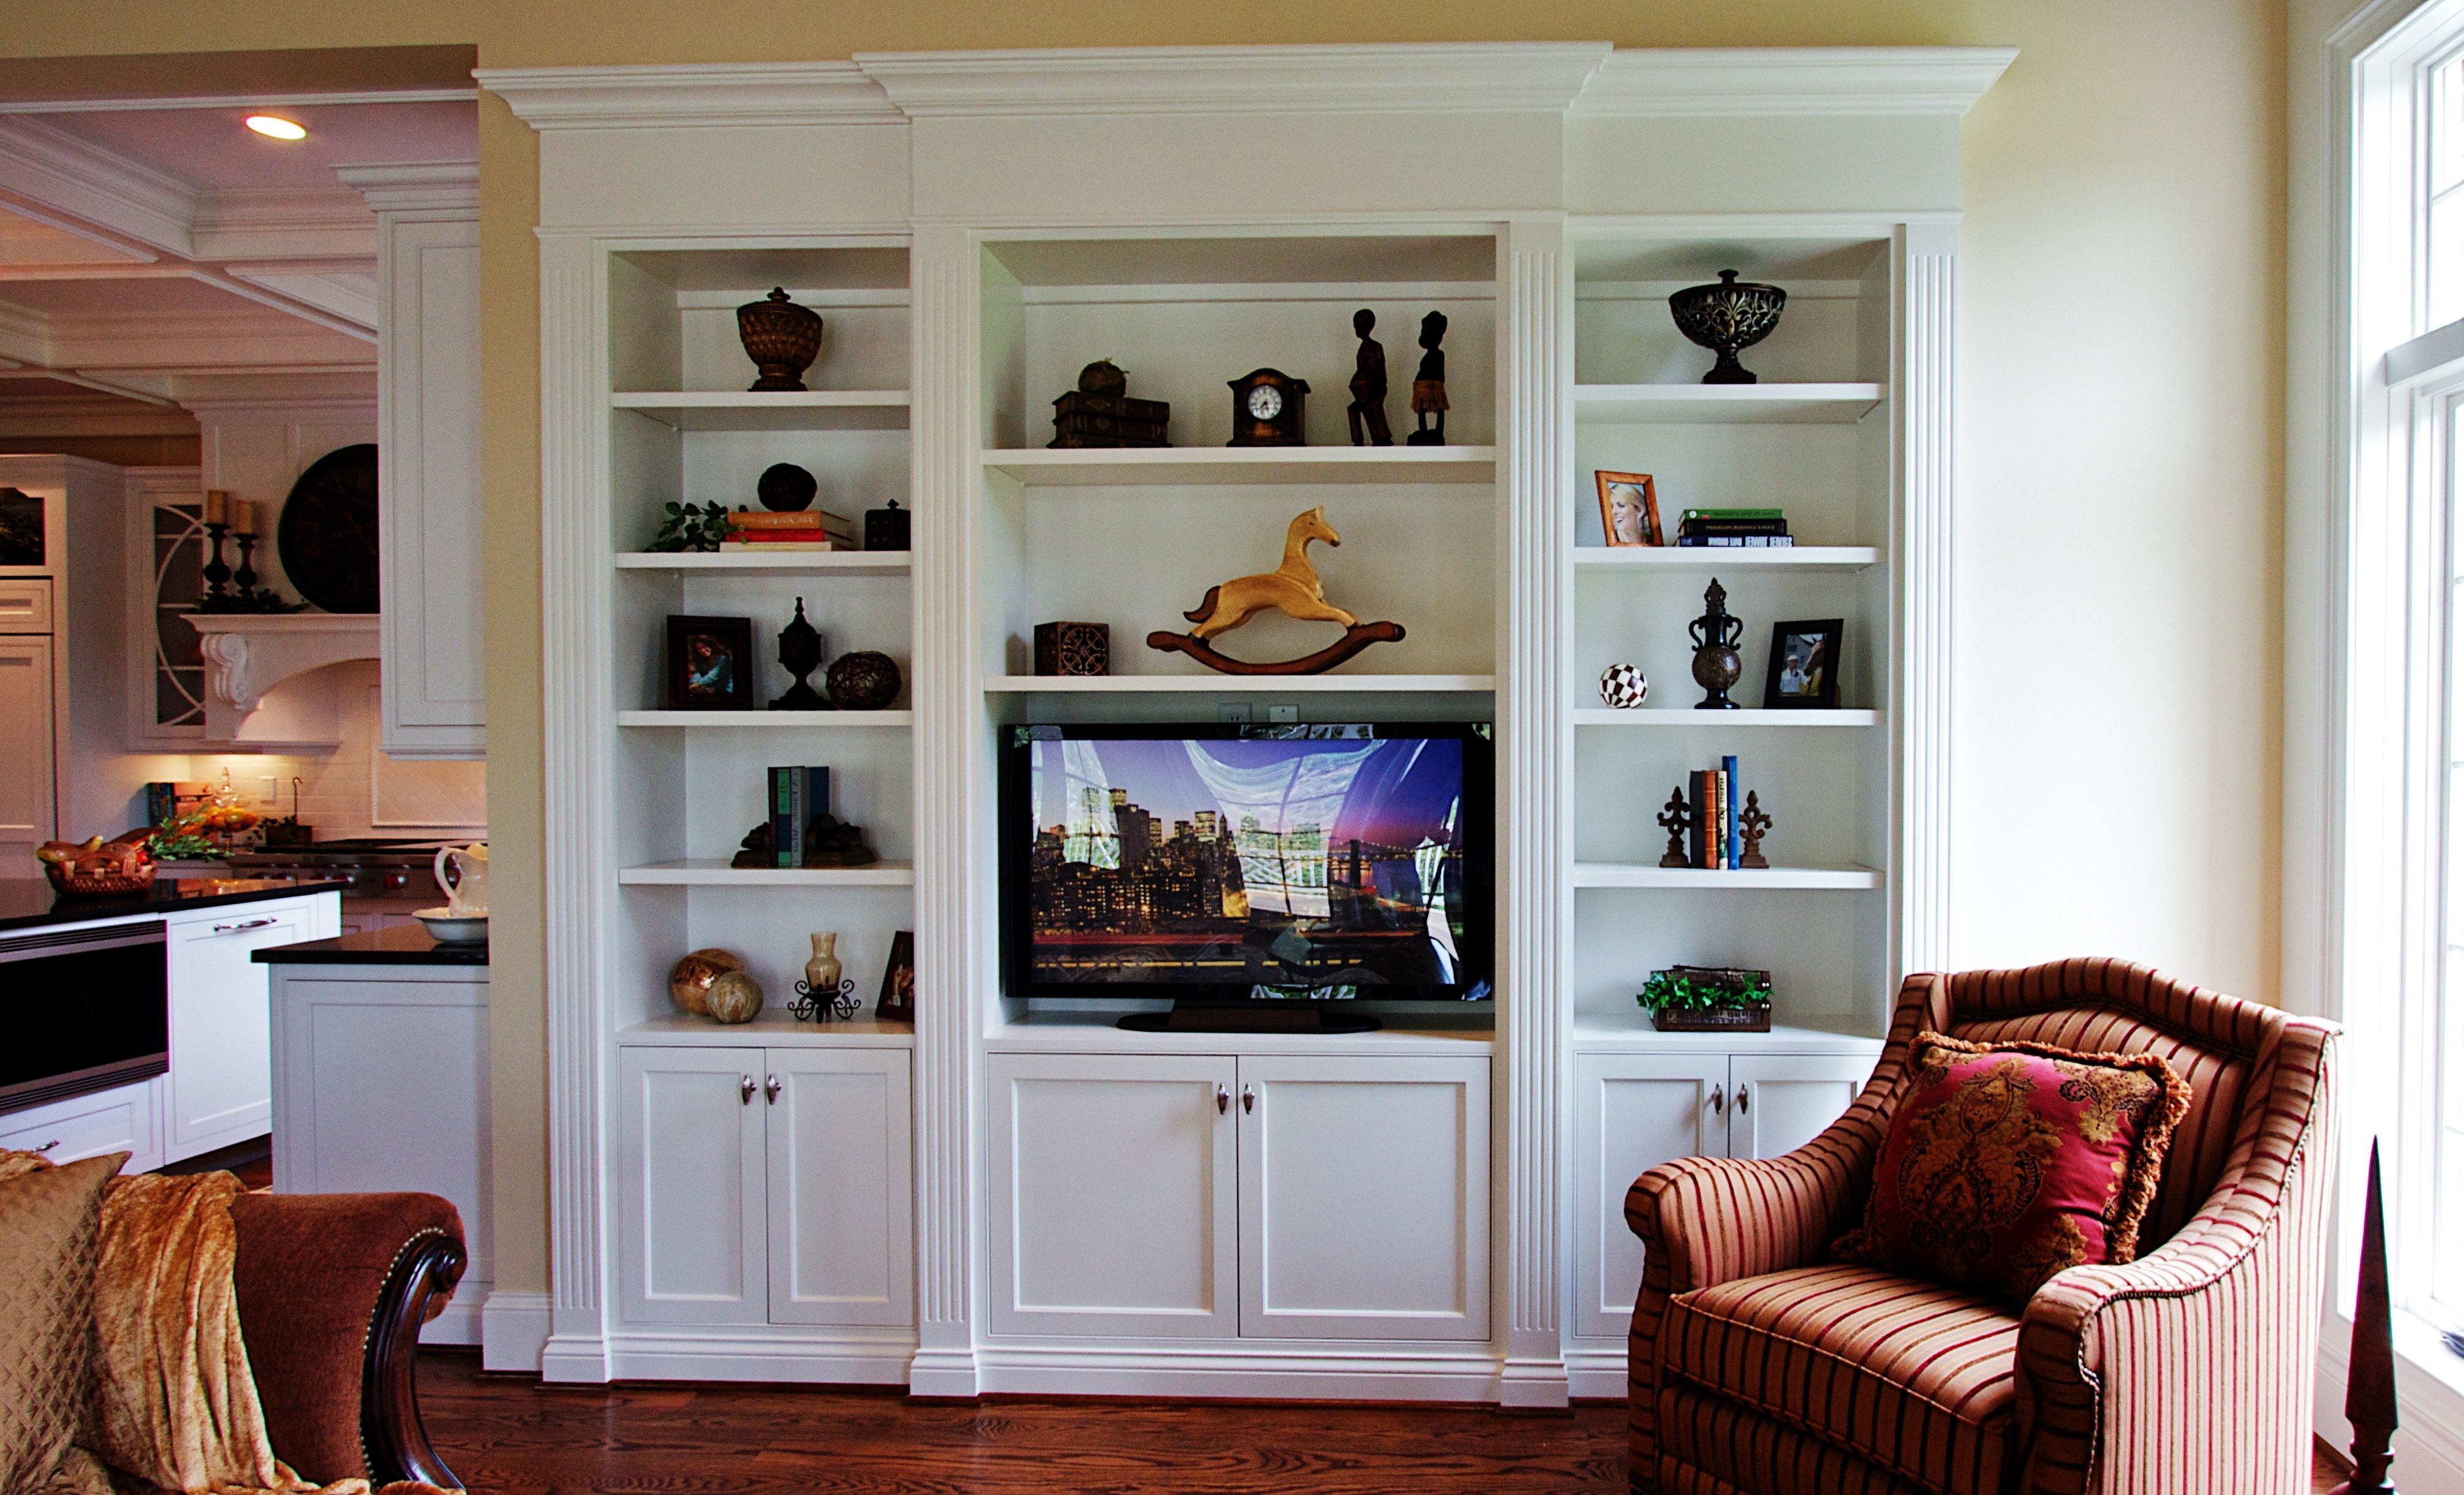 Most Recently Released Tv Cabinet And Bookcases For Wall Units: Inspiring Built In Bookshelves With Tv Built In (View 15 of 15)